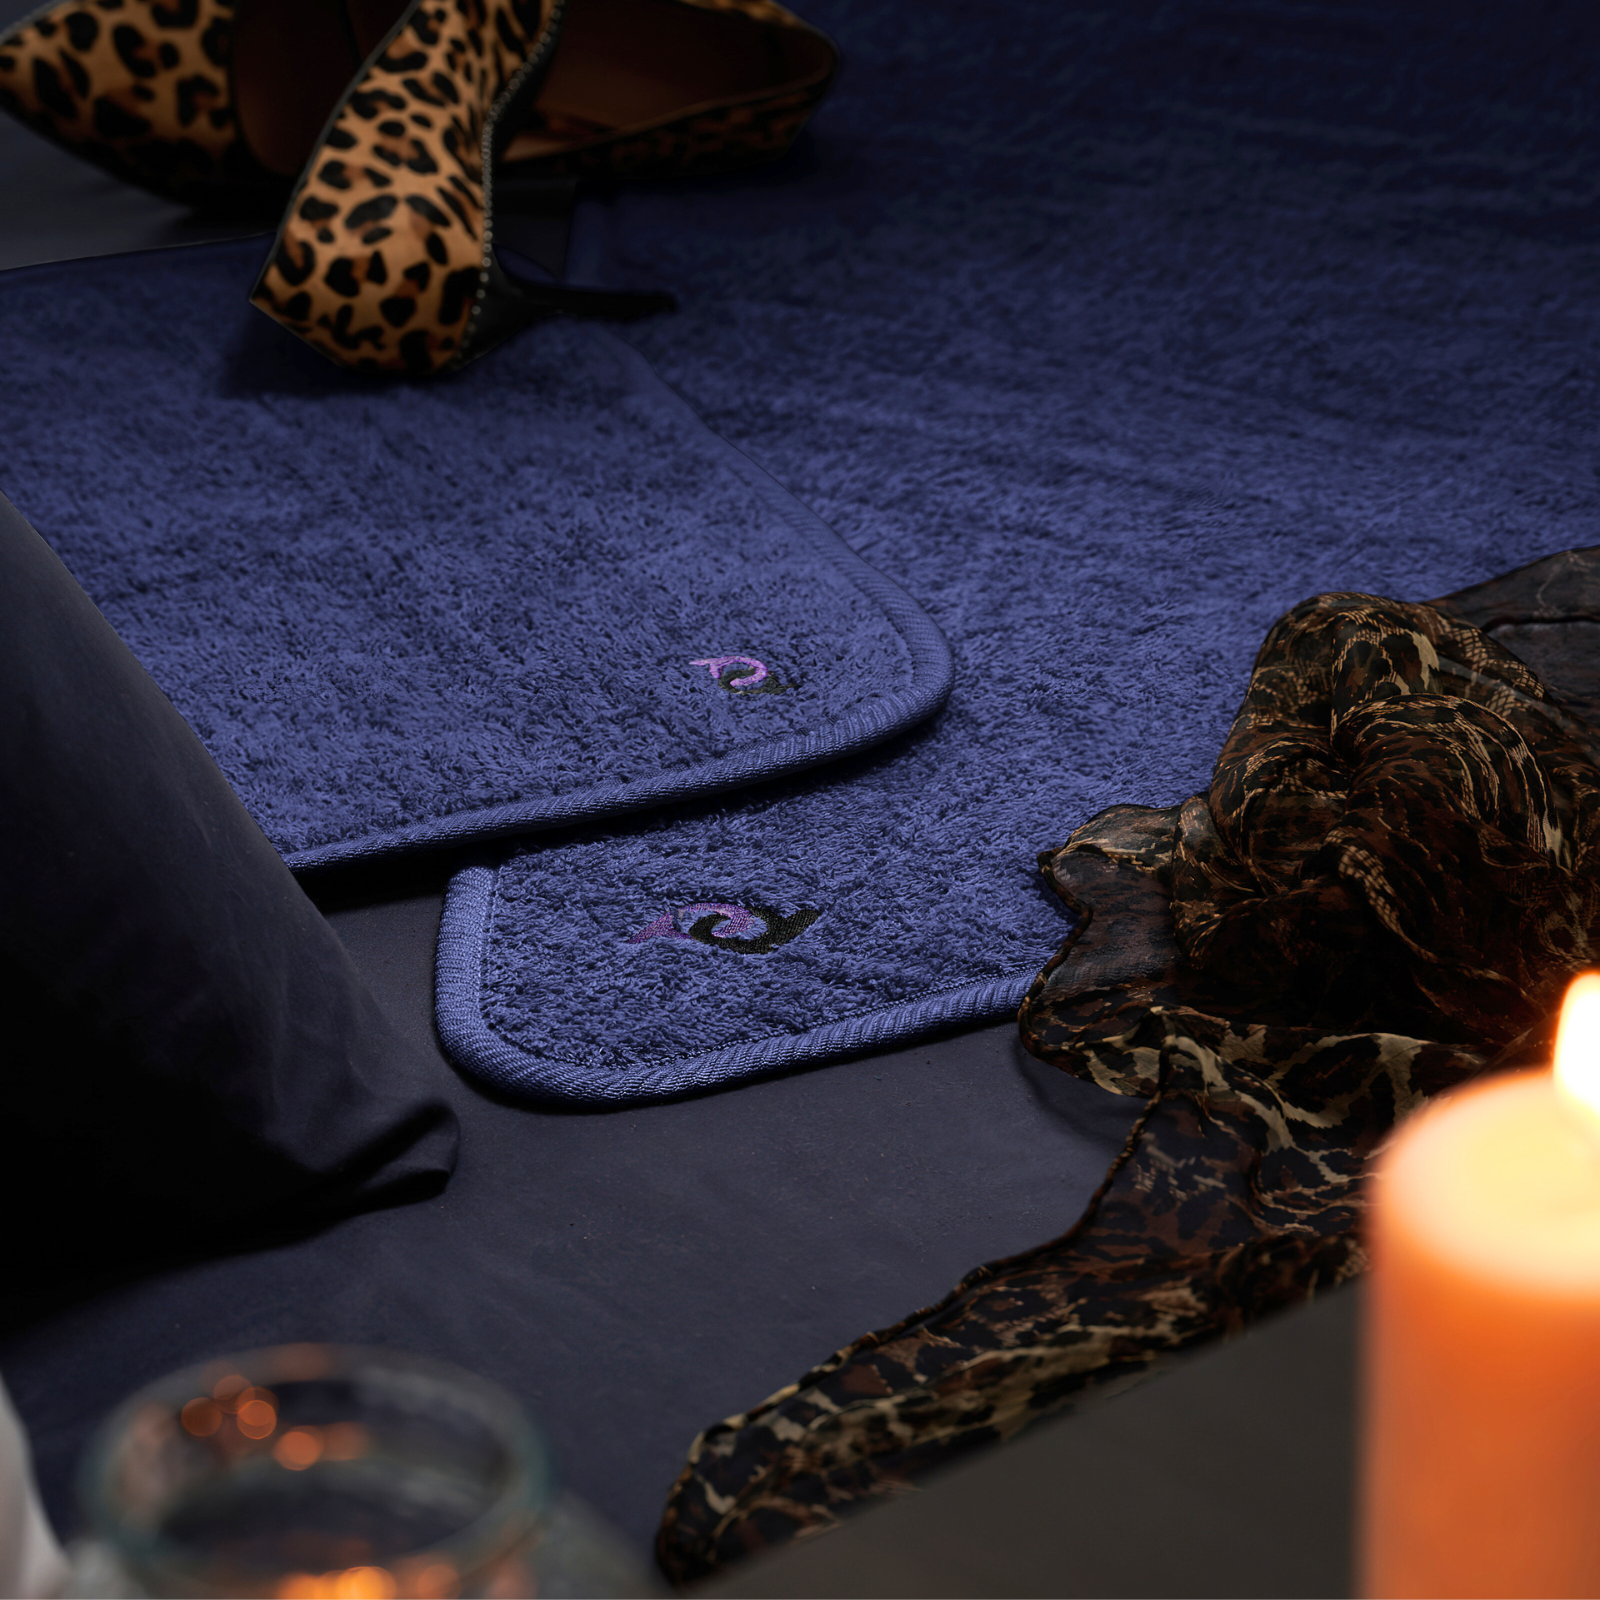 royal blue coloured sex mat displayed in romantic ambience with candles and cheetah print attire